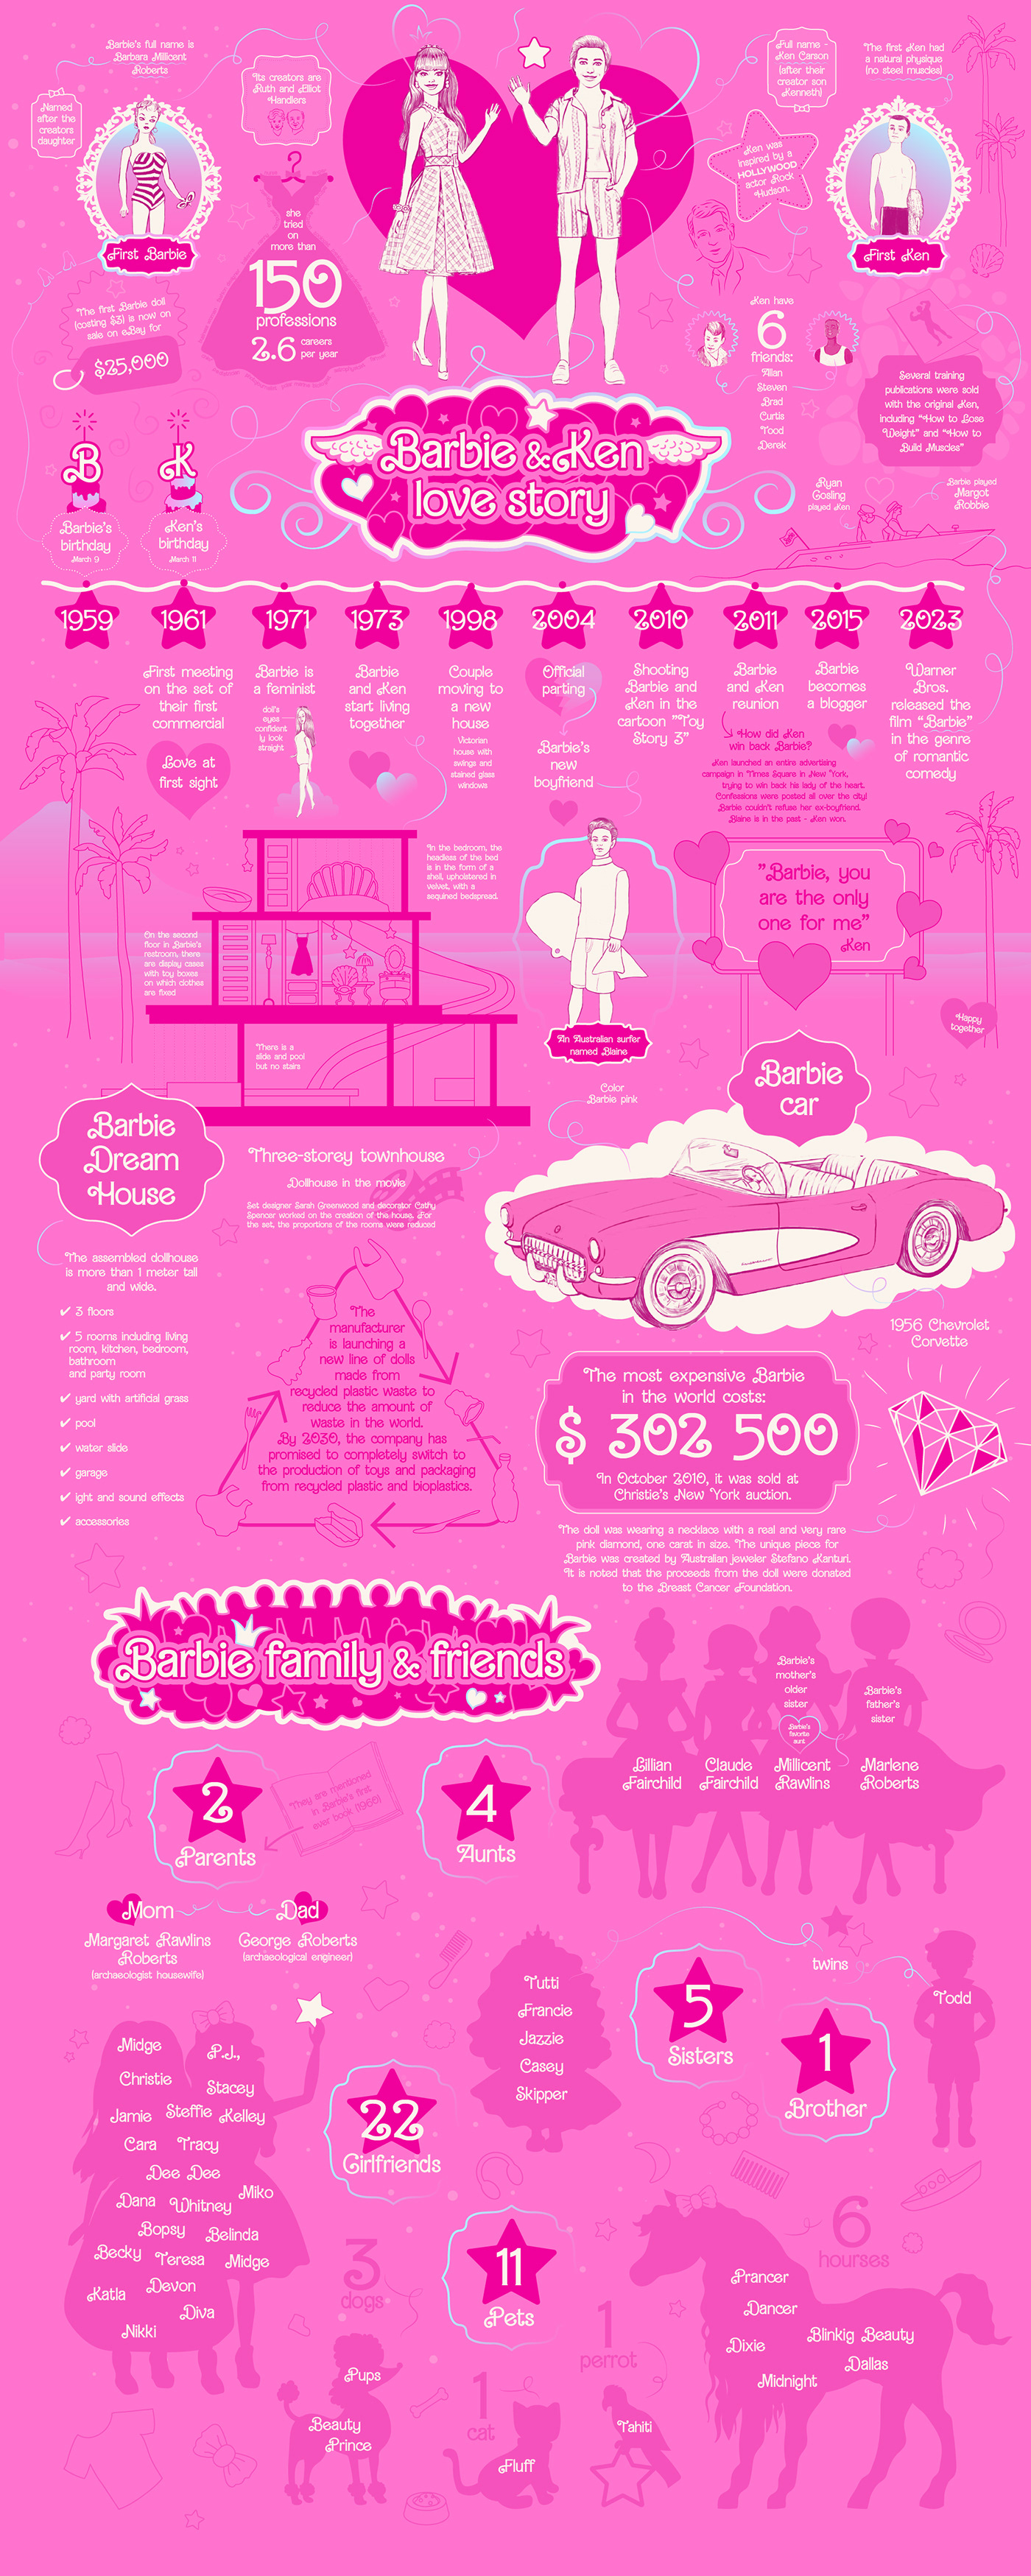 barbie infographics infographic data visualization mattel barbie infographic information design lovestory pink poster barbiecore